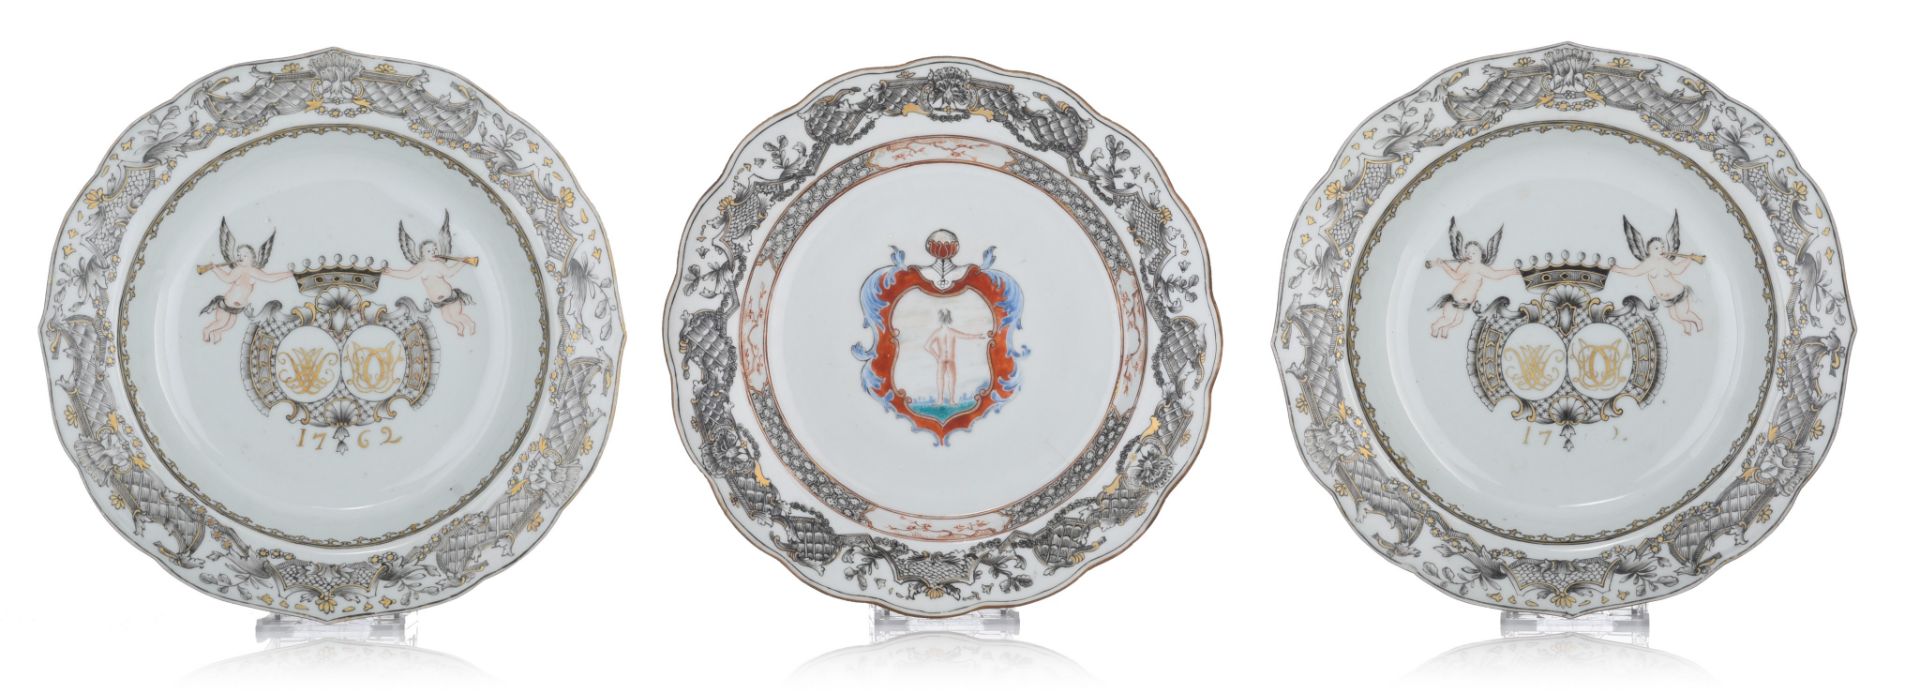 (BIDDING ONLY ON CARLOBONTE.BE) Three Chinese 'en grisaille', famille rose and gilt pseudo-armorial